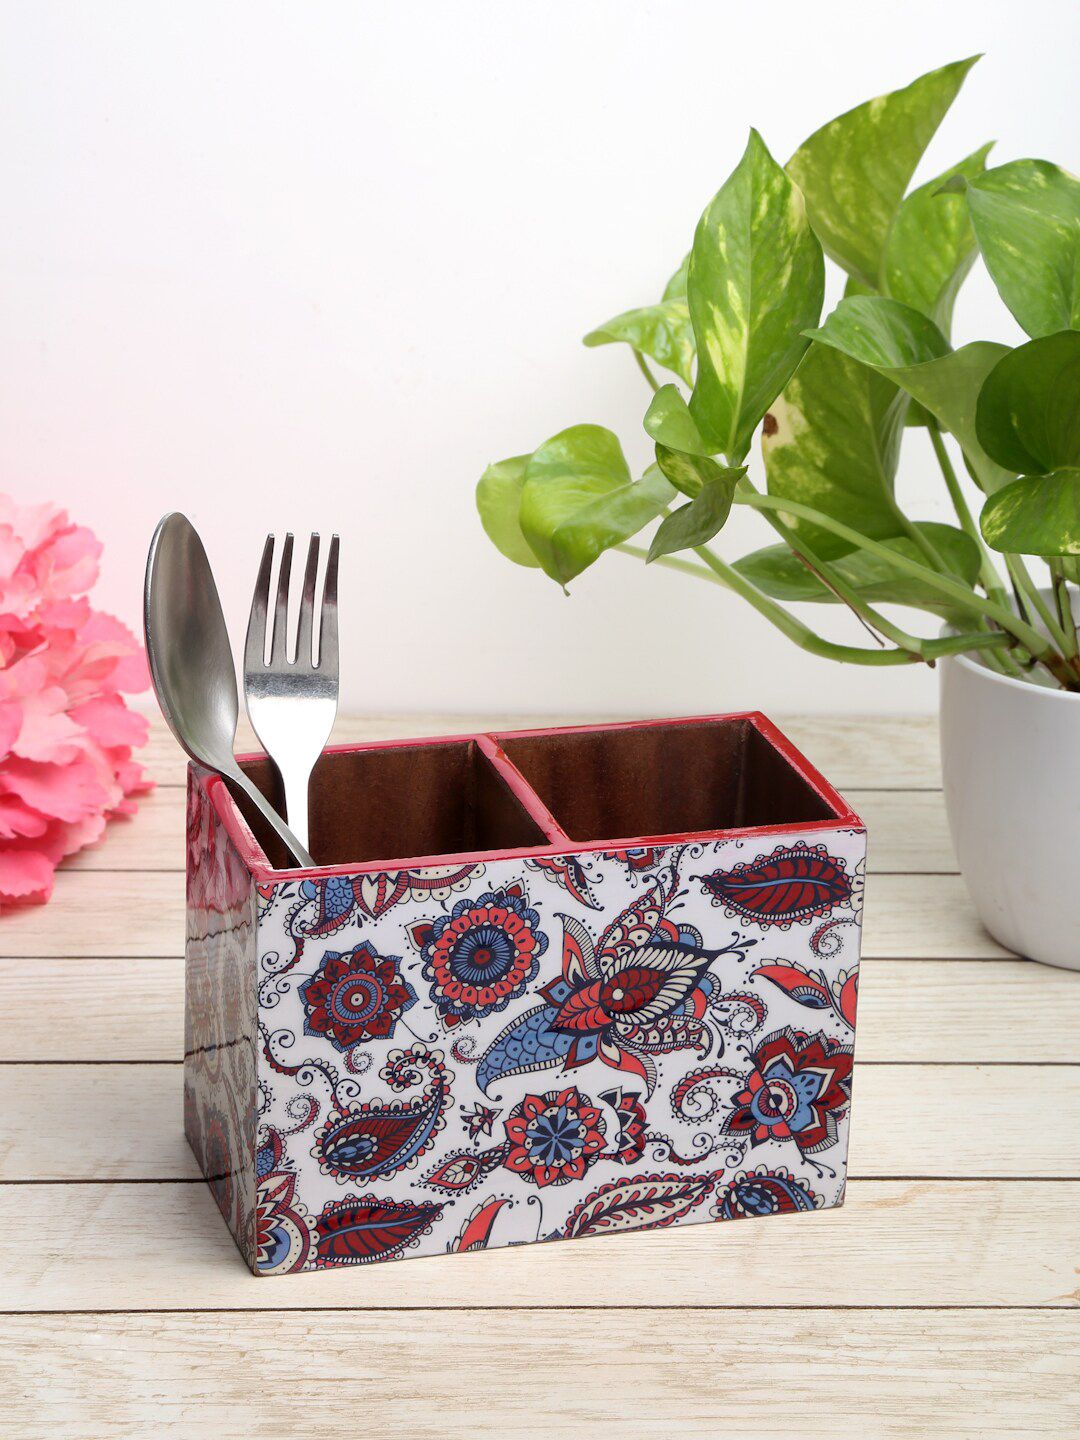 ROMEE Maroon & White Printed Wooden Cutlery Holder With 2 Compartment Price in India